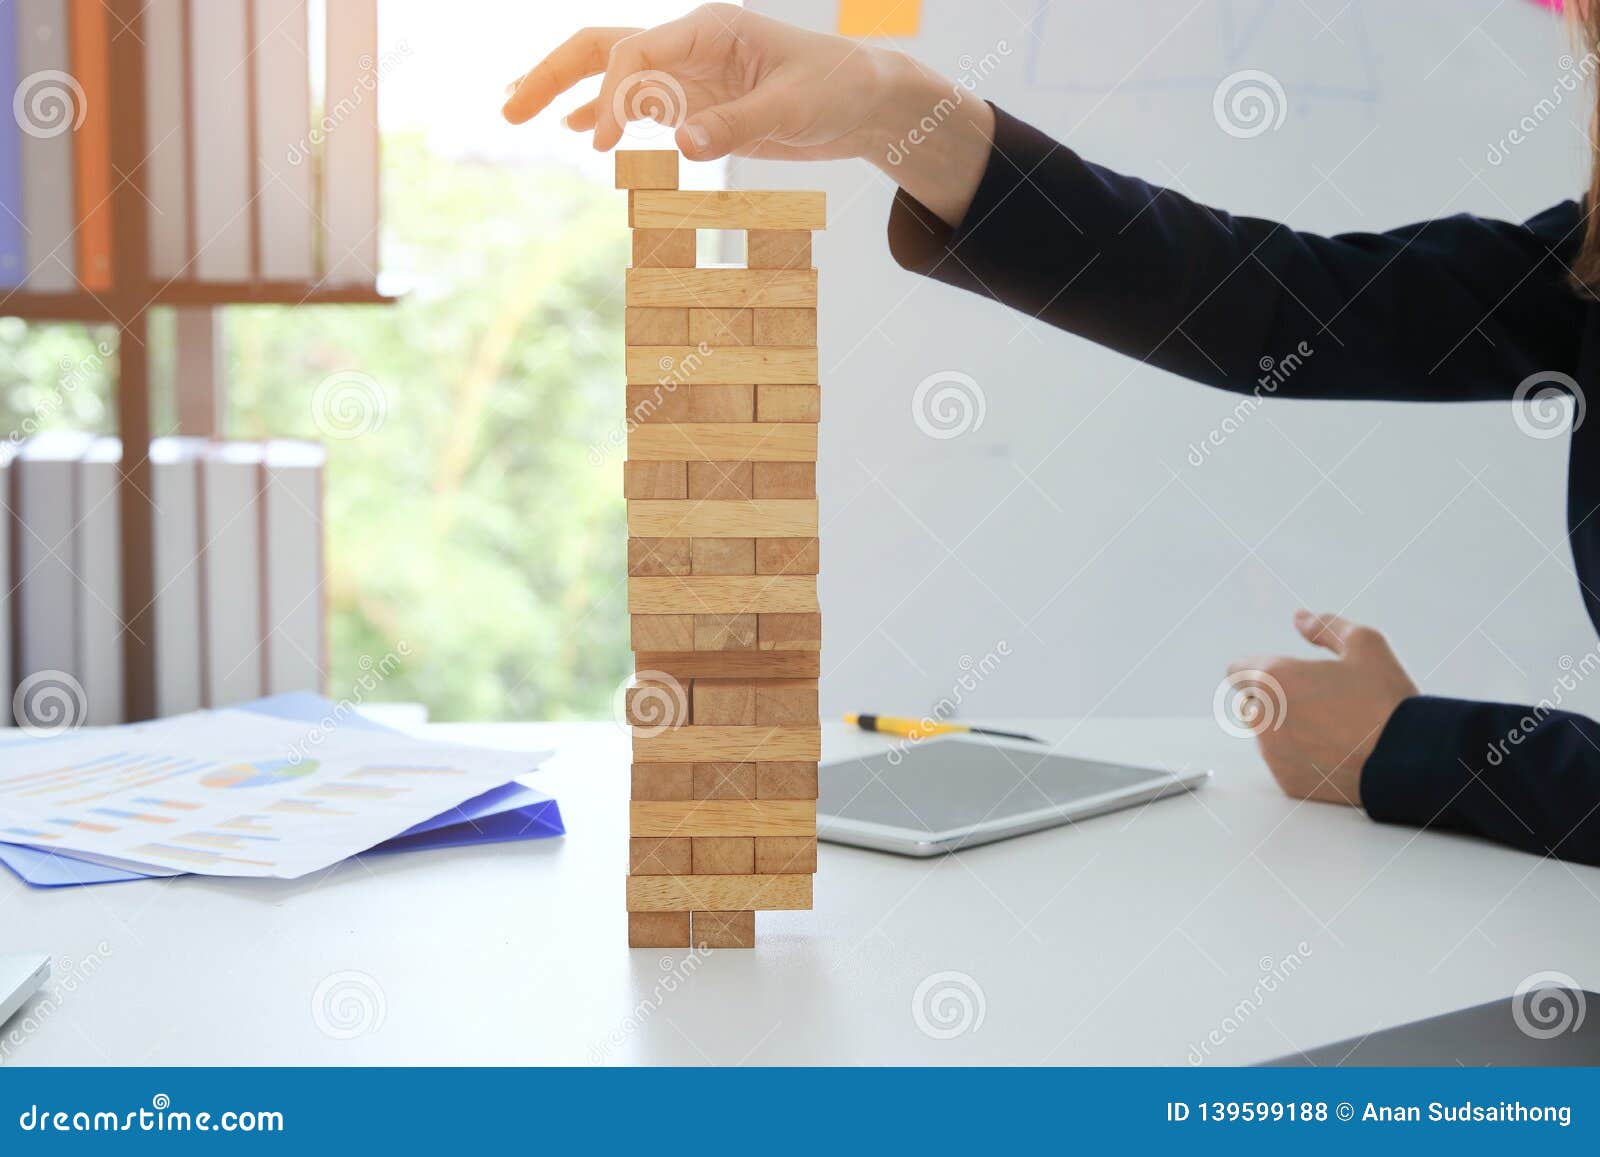 thoughtful and mindful business woman playing wooden block tower in office. risk and strategy business concept